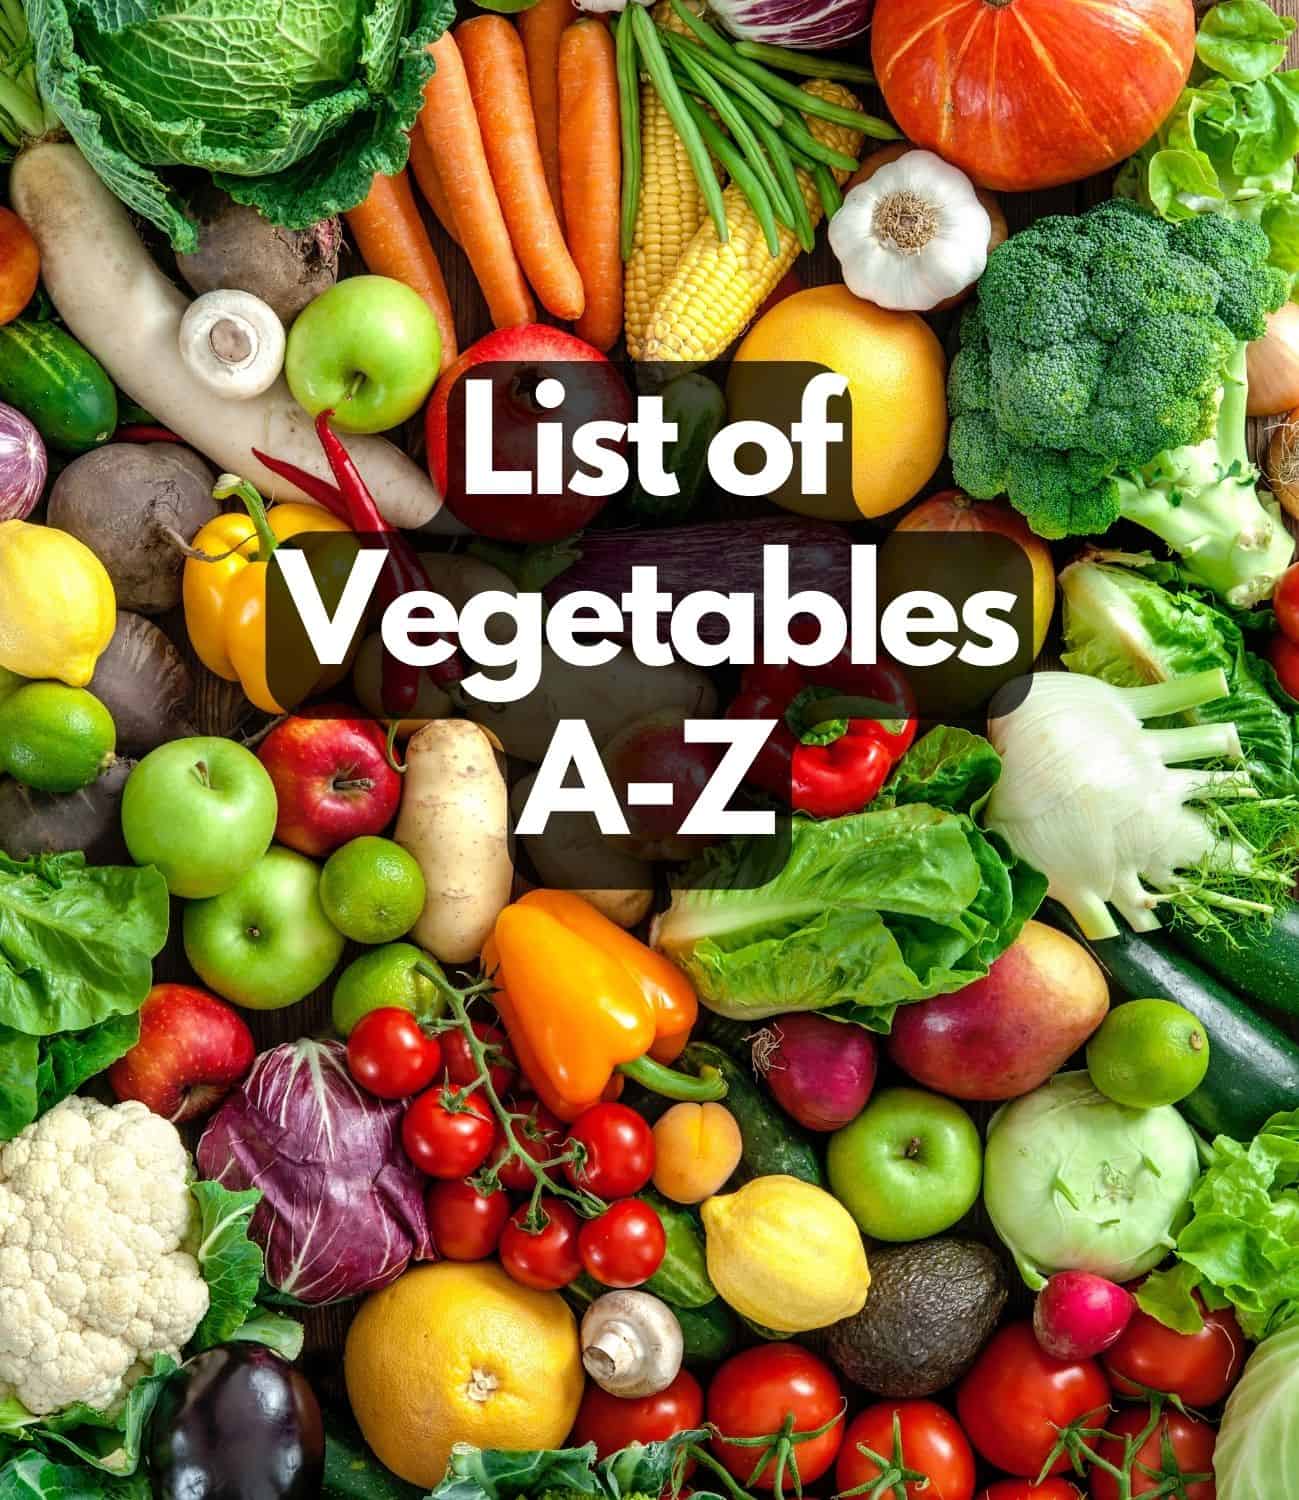 Pile of veg, with text: List of Vegetables A-Z.